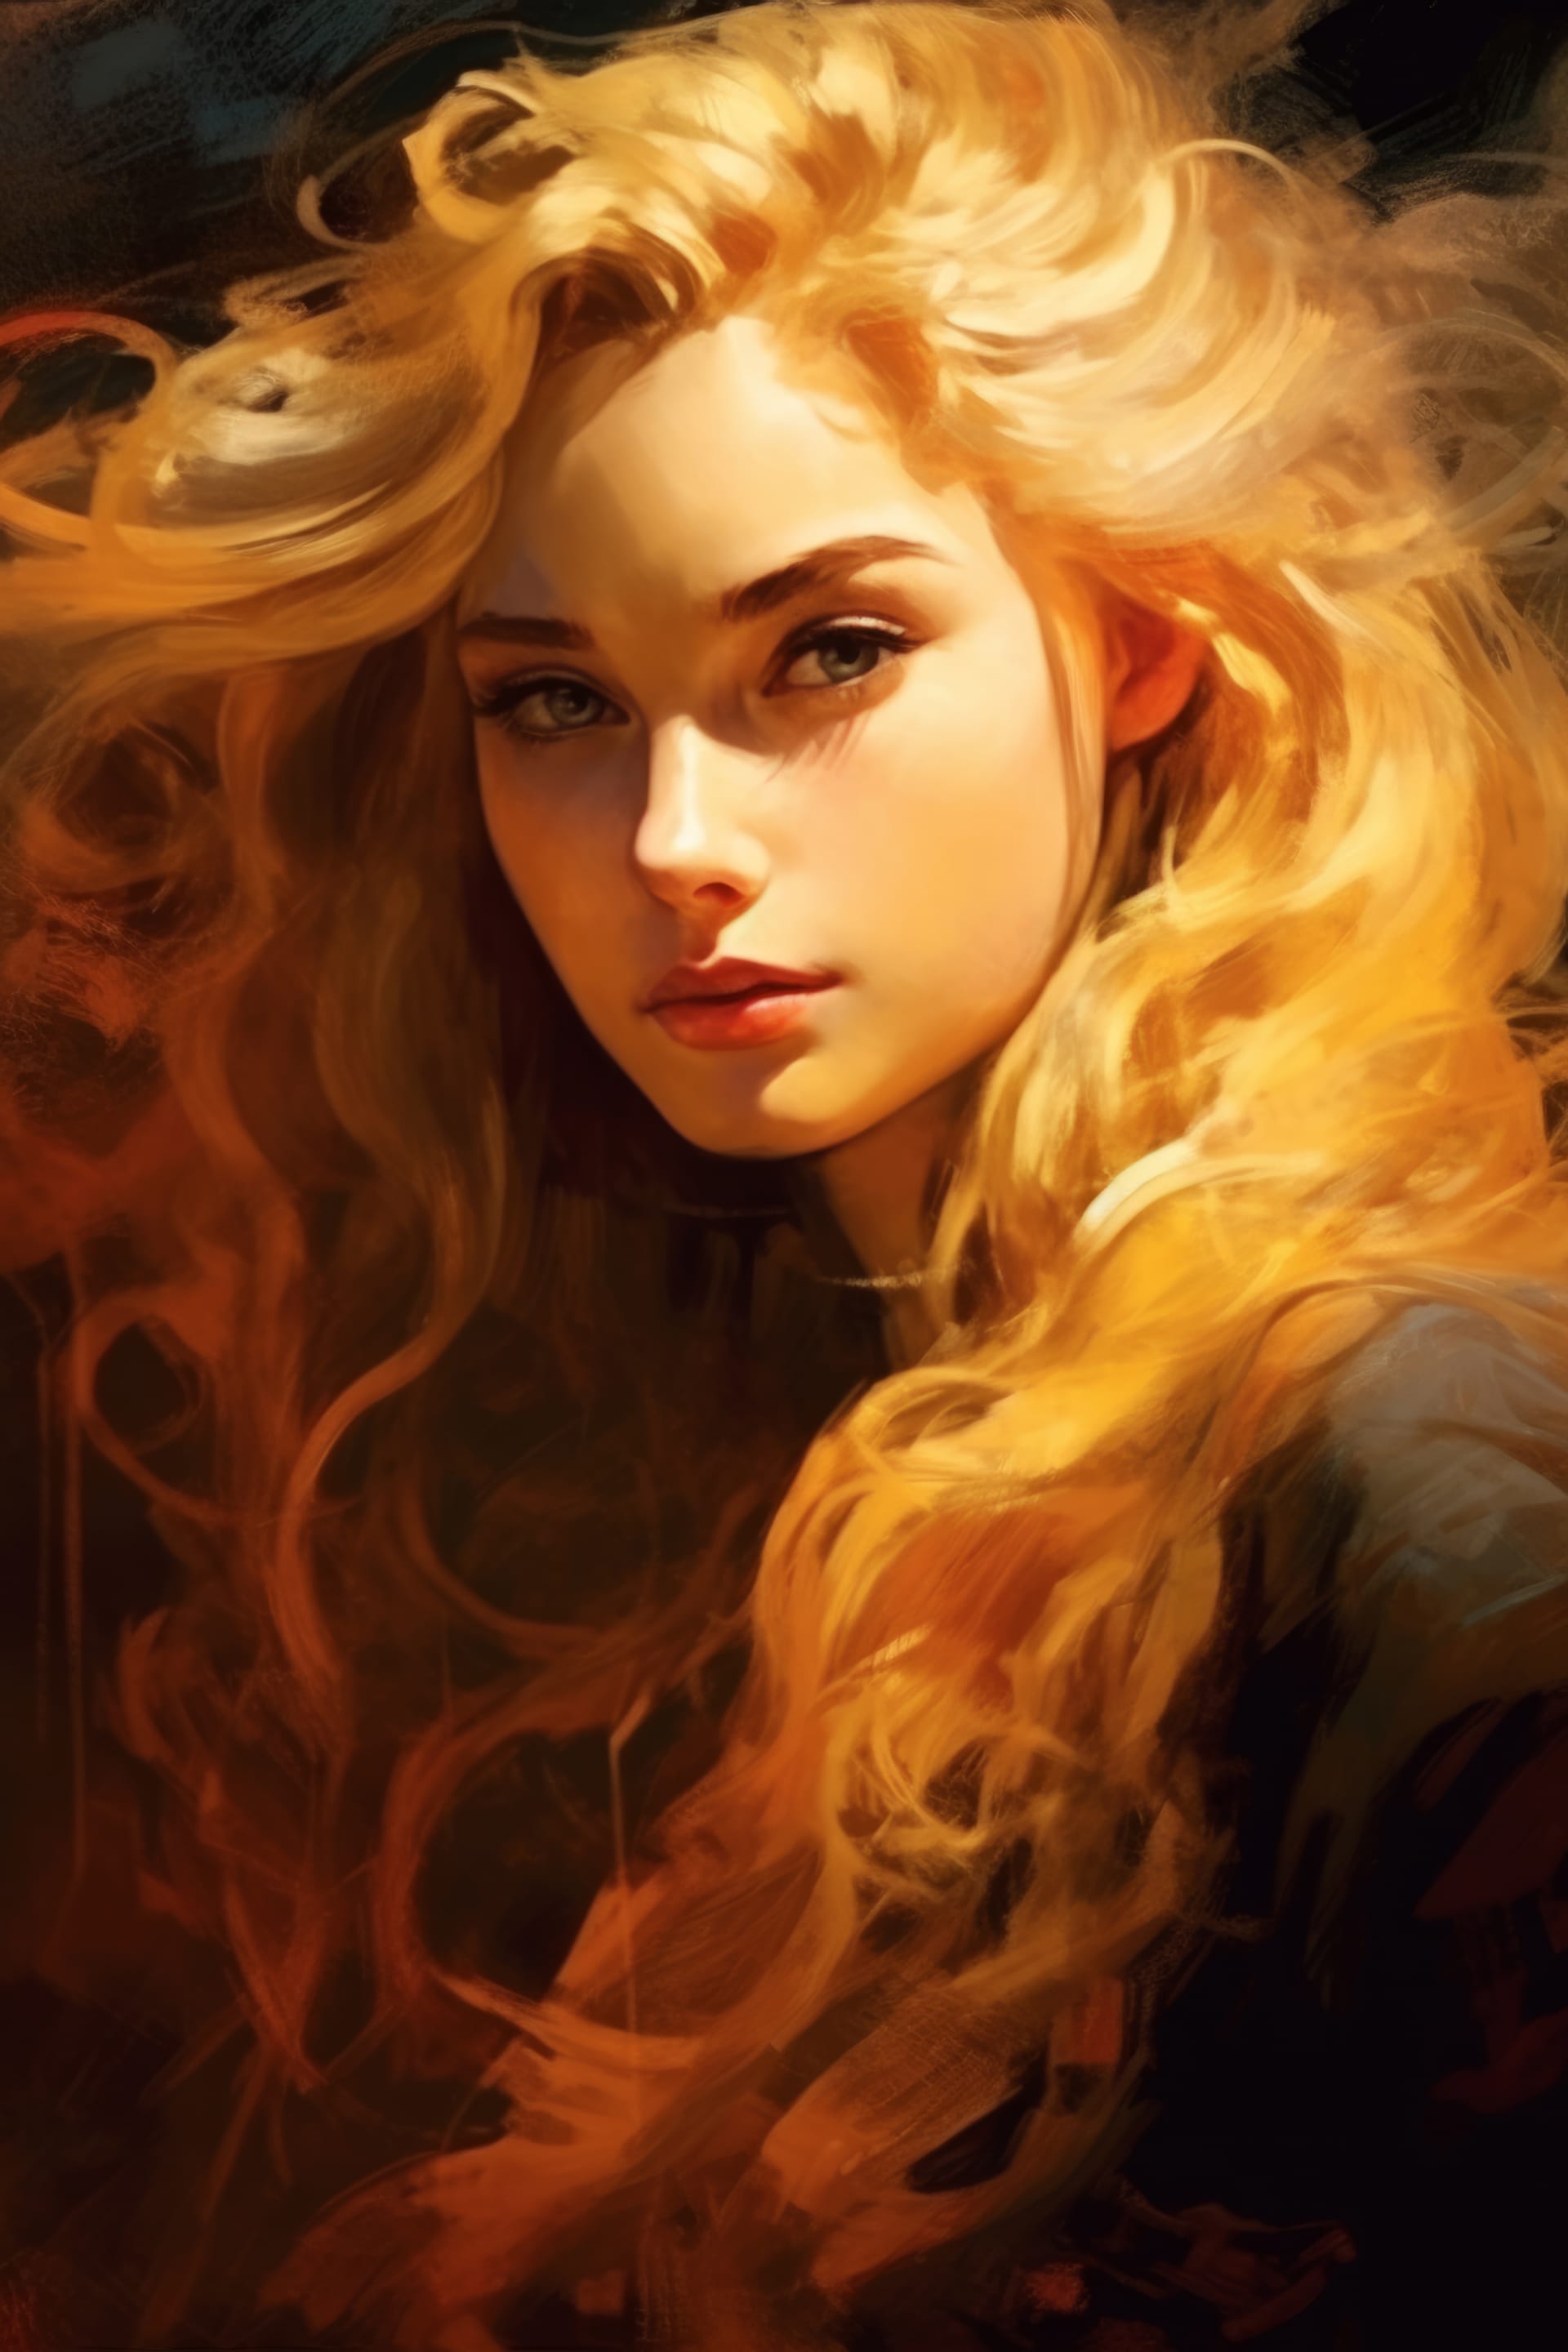 Painting beautiful girl with long blonde hair